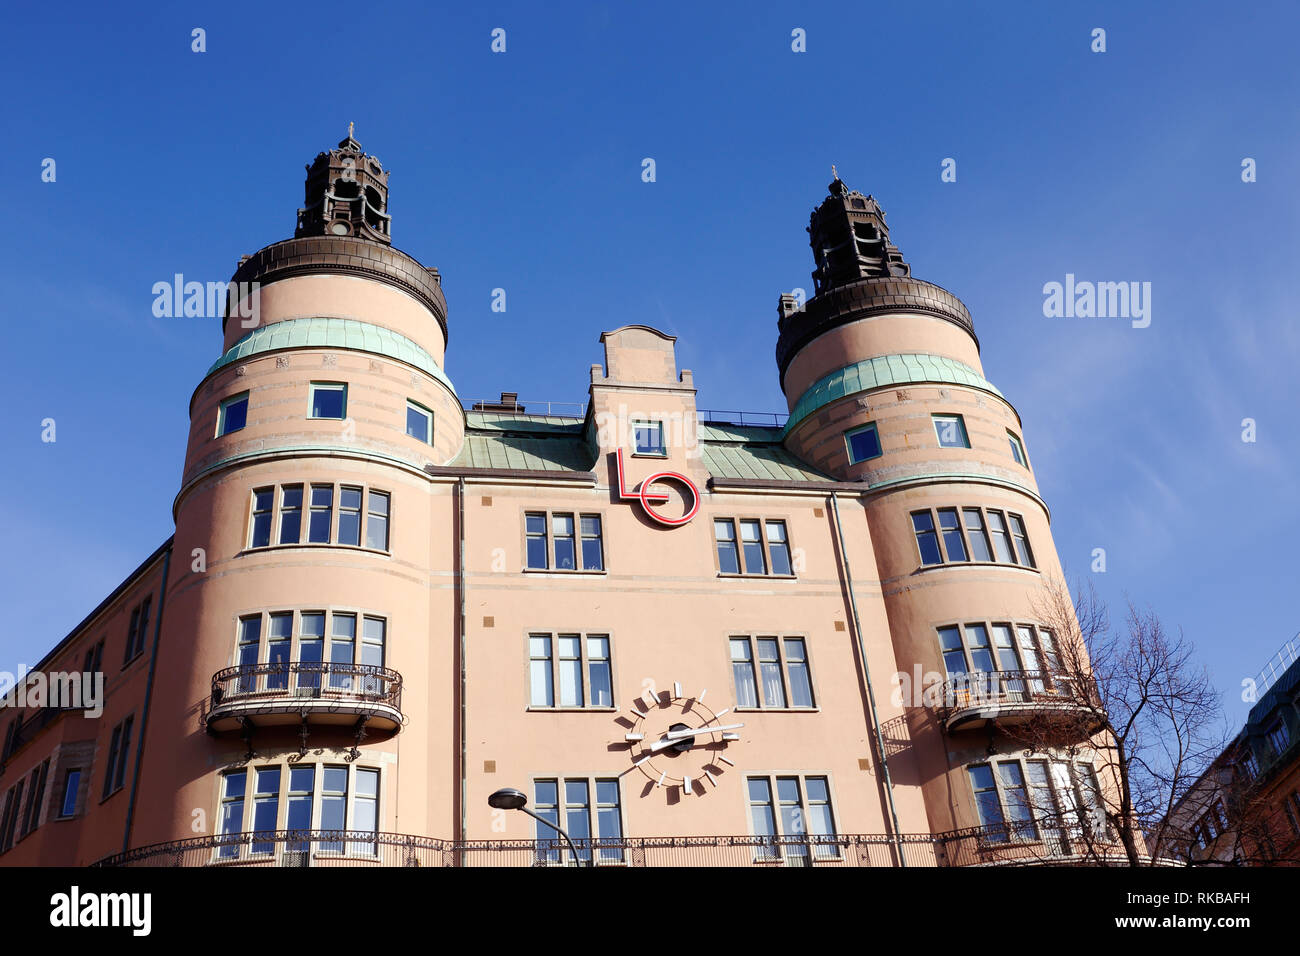 Stockholm, Sweden April 11, 2018: Exterior view of the building with Swedis trade union LO head office located at the Norra Bantorget square. Stock Photo